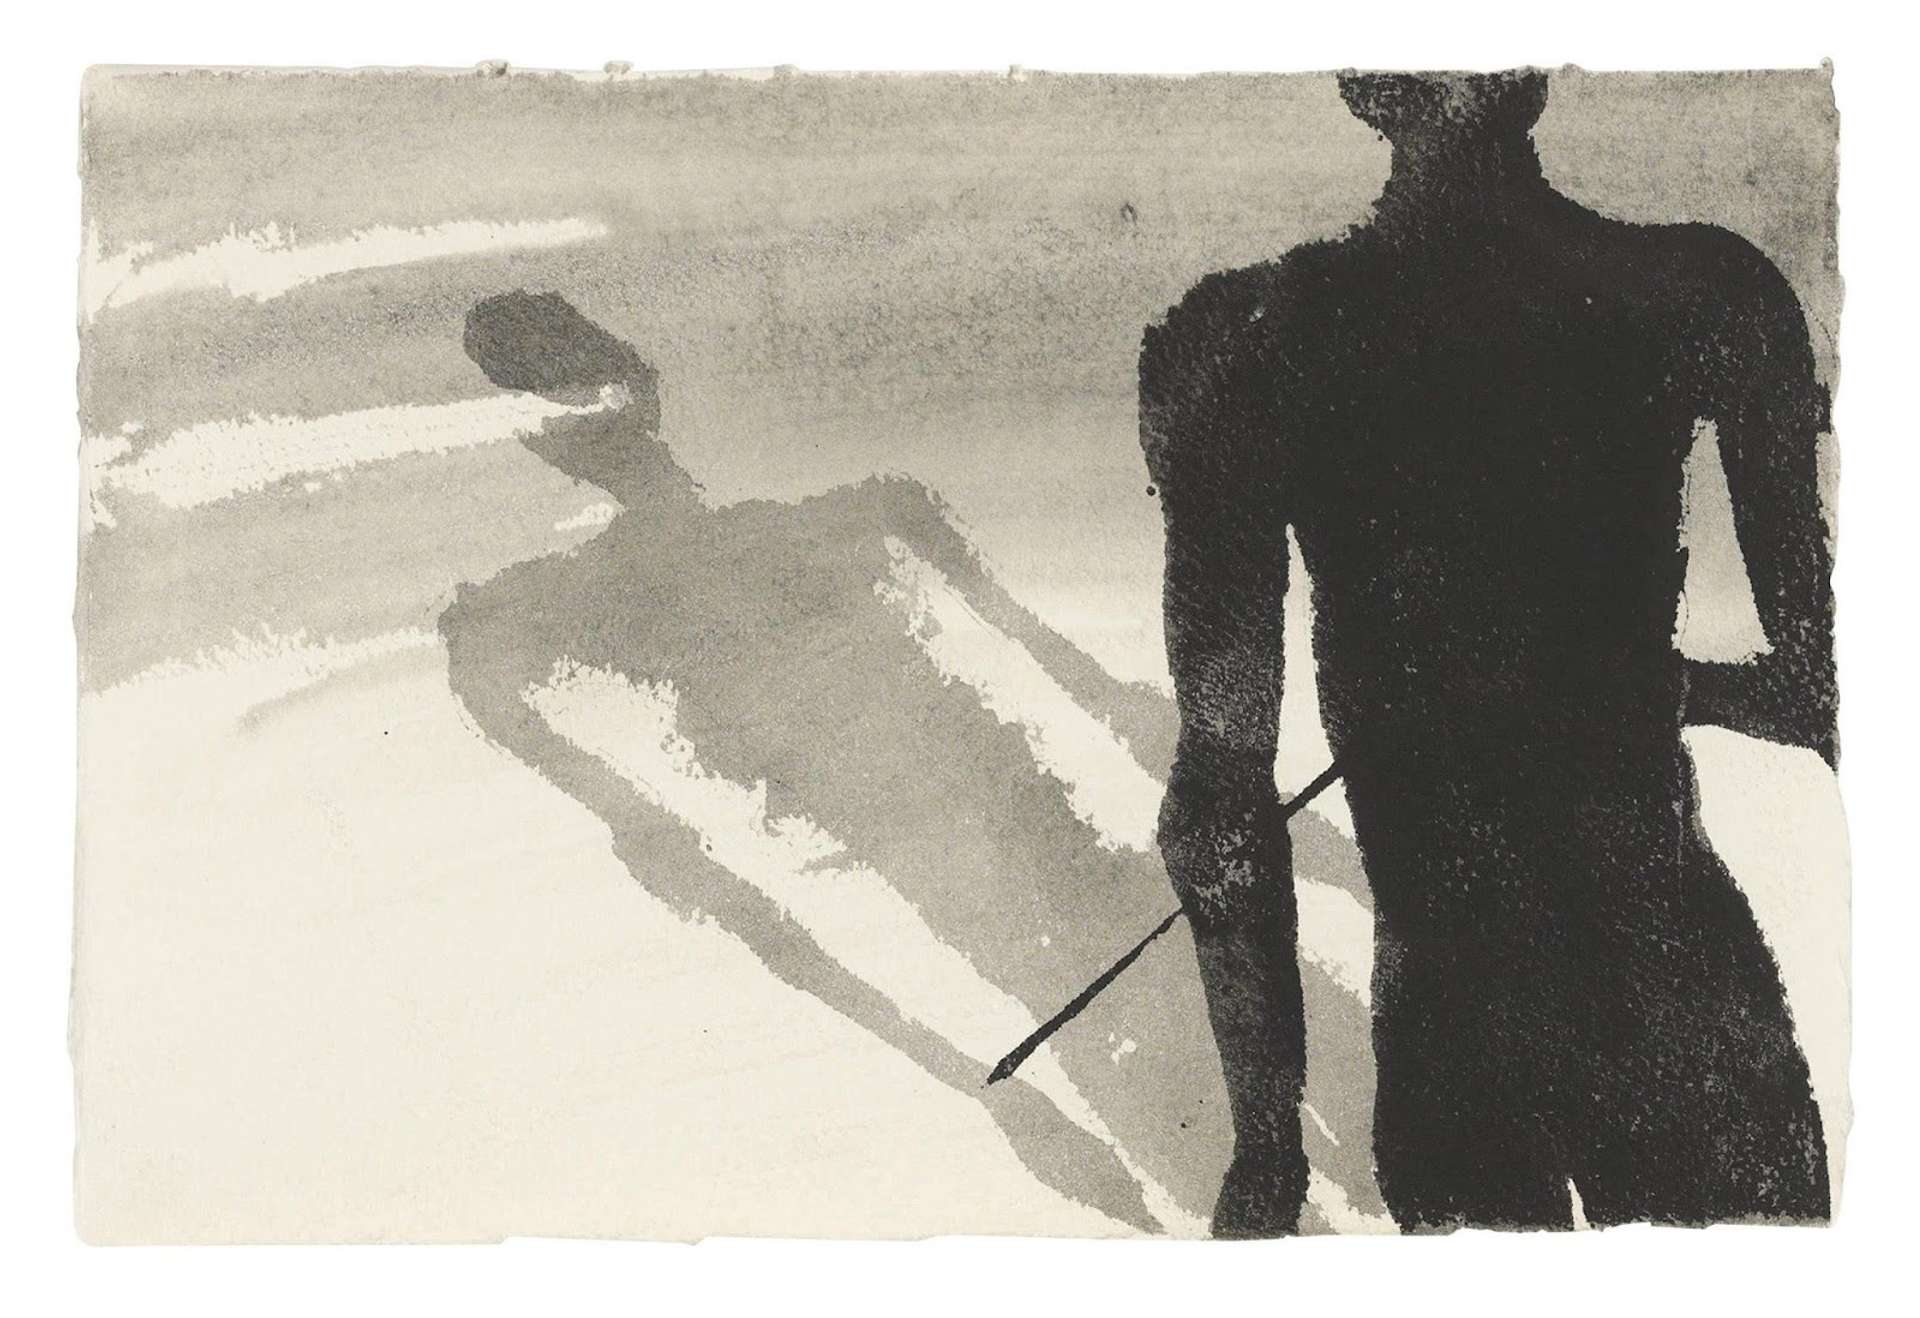 A print by Antony Gormley, depicting a figure touching its shadow with a stick. Both figures are in gradients of black and grey against a white background.